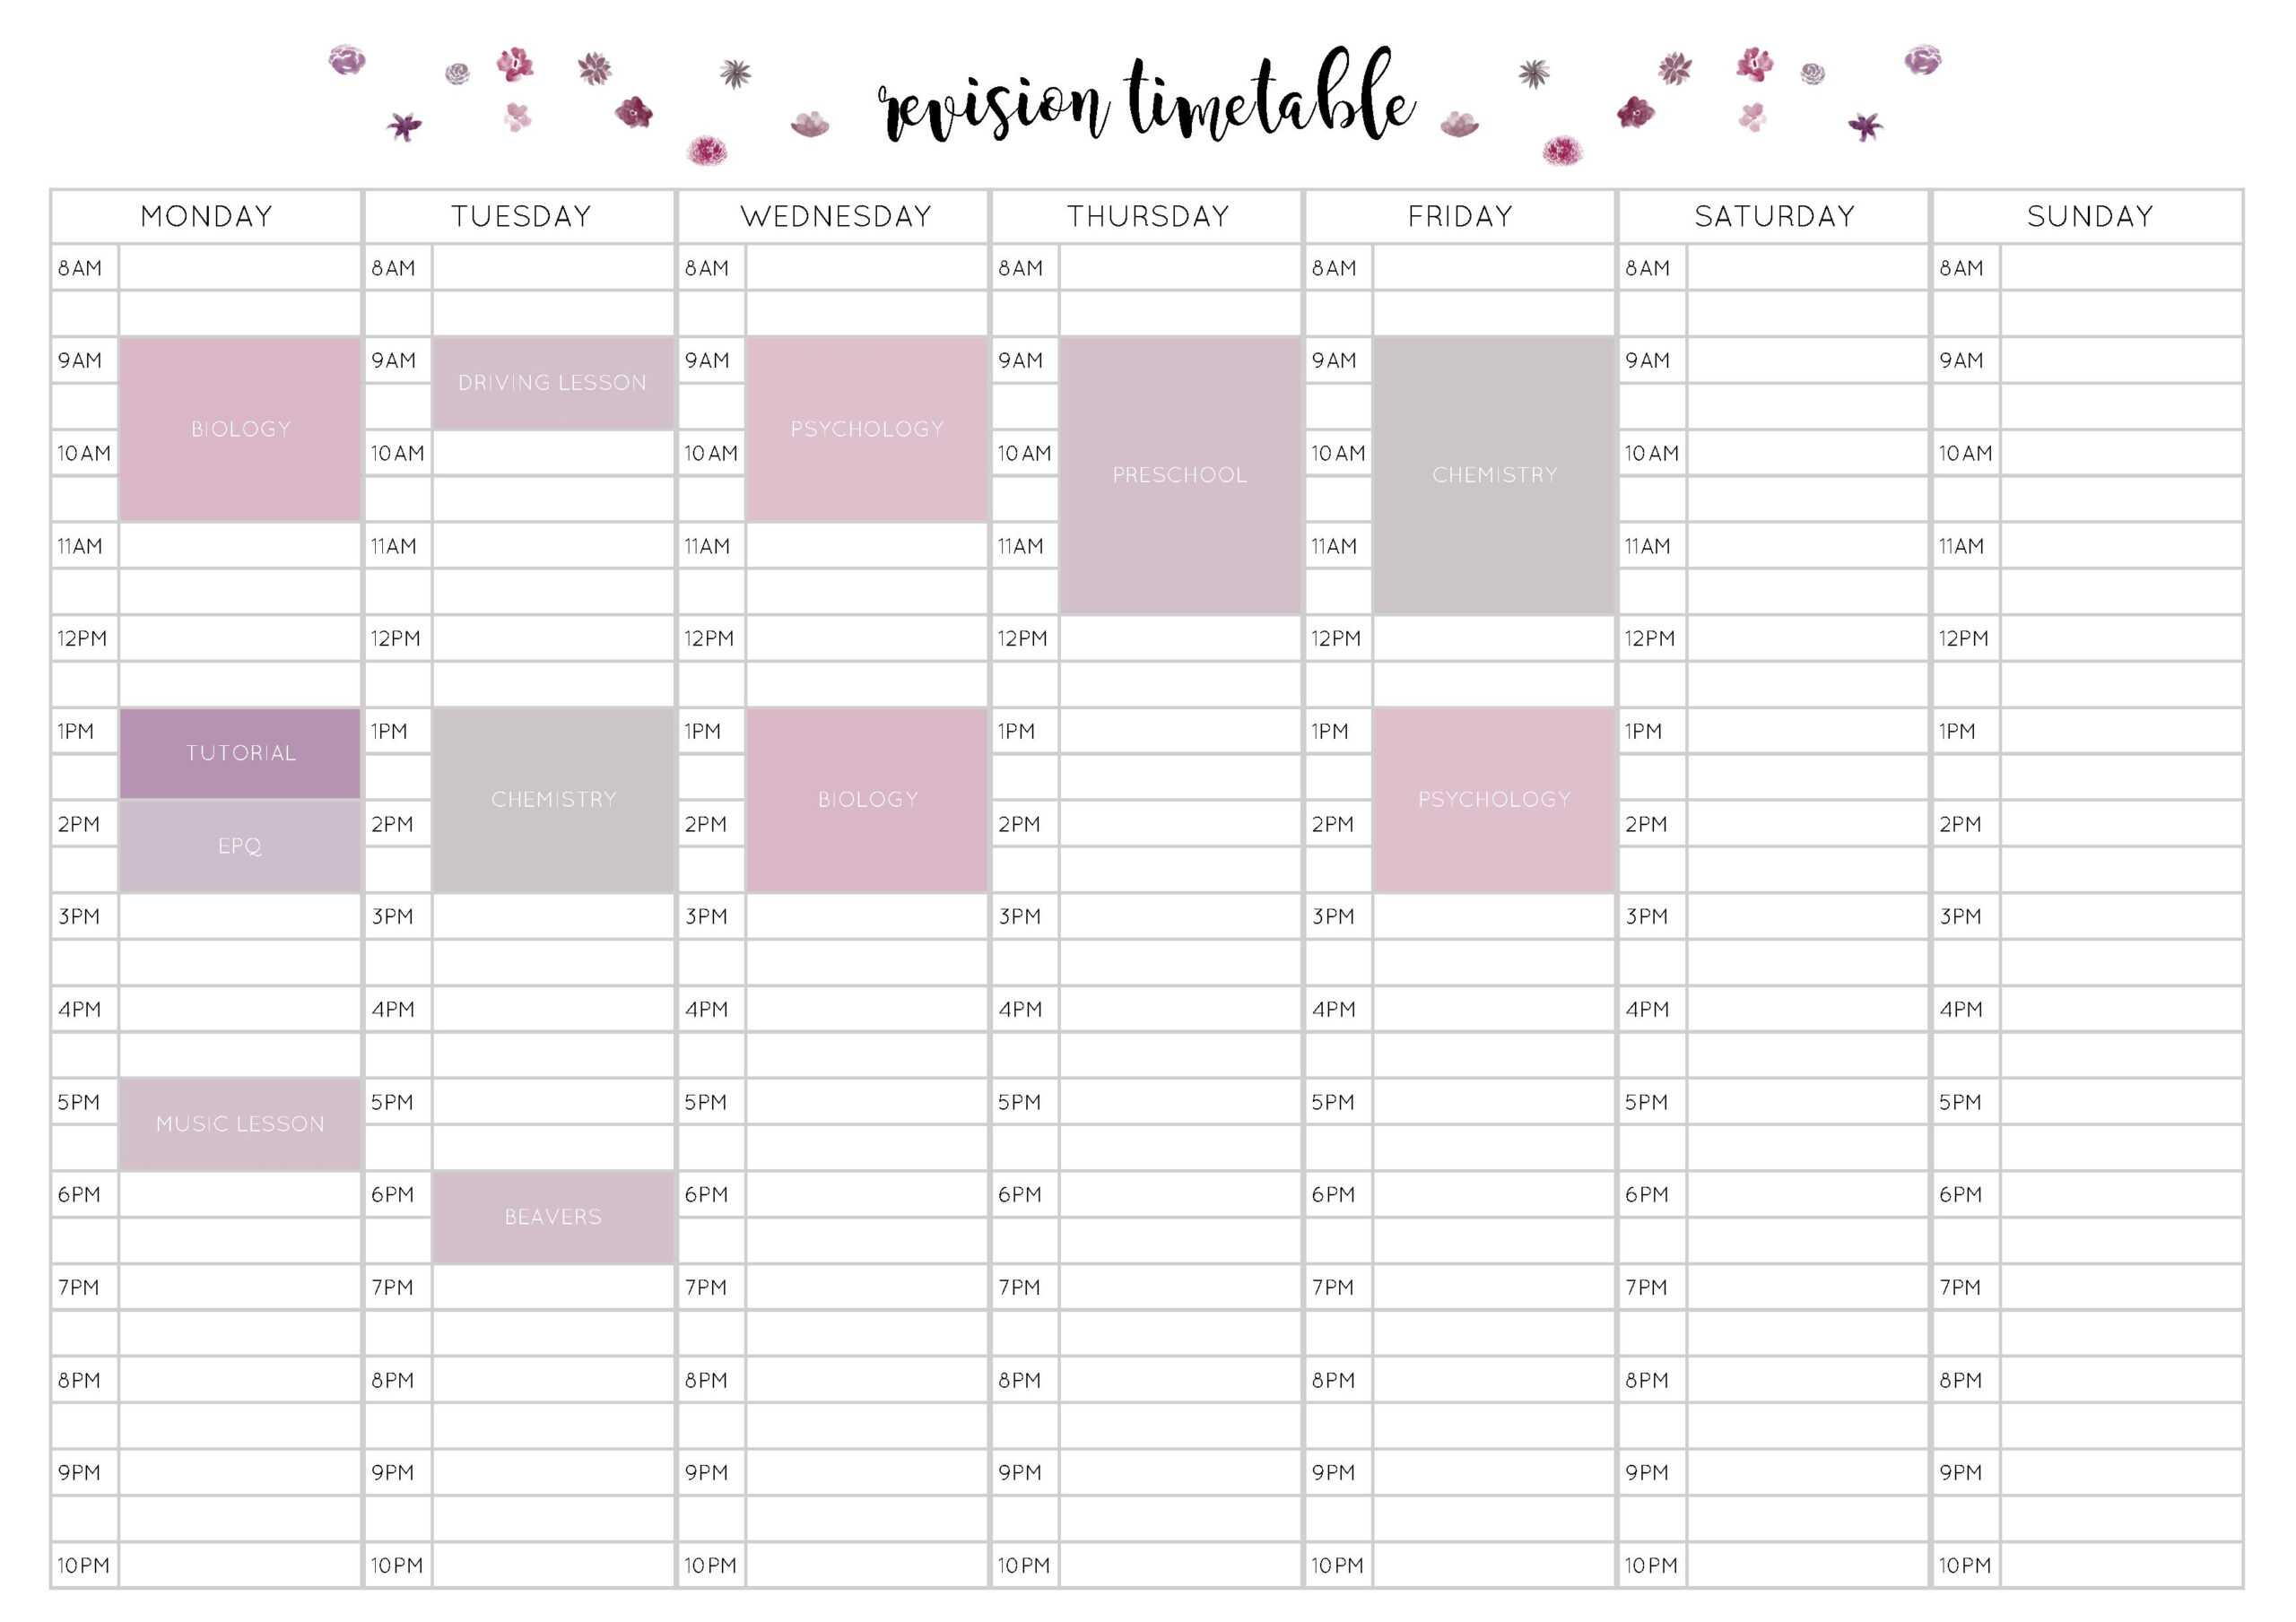 Weekly Revision Timetable - Falep.midnightpig.co With Blank Revision Timetable Template